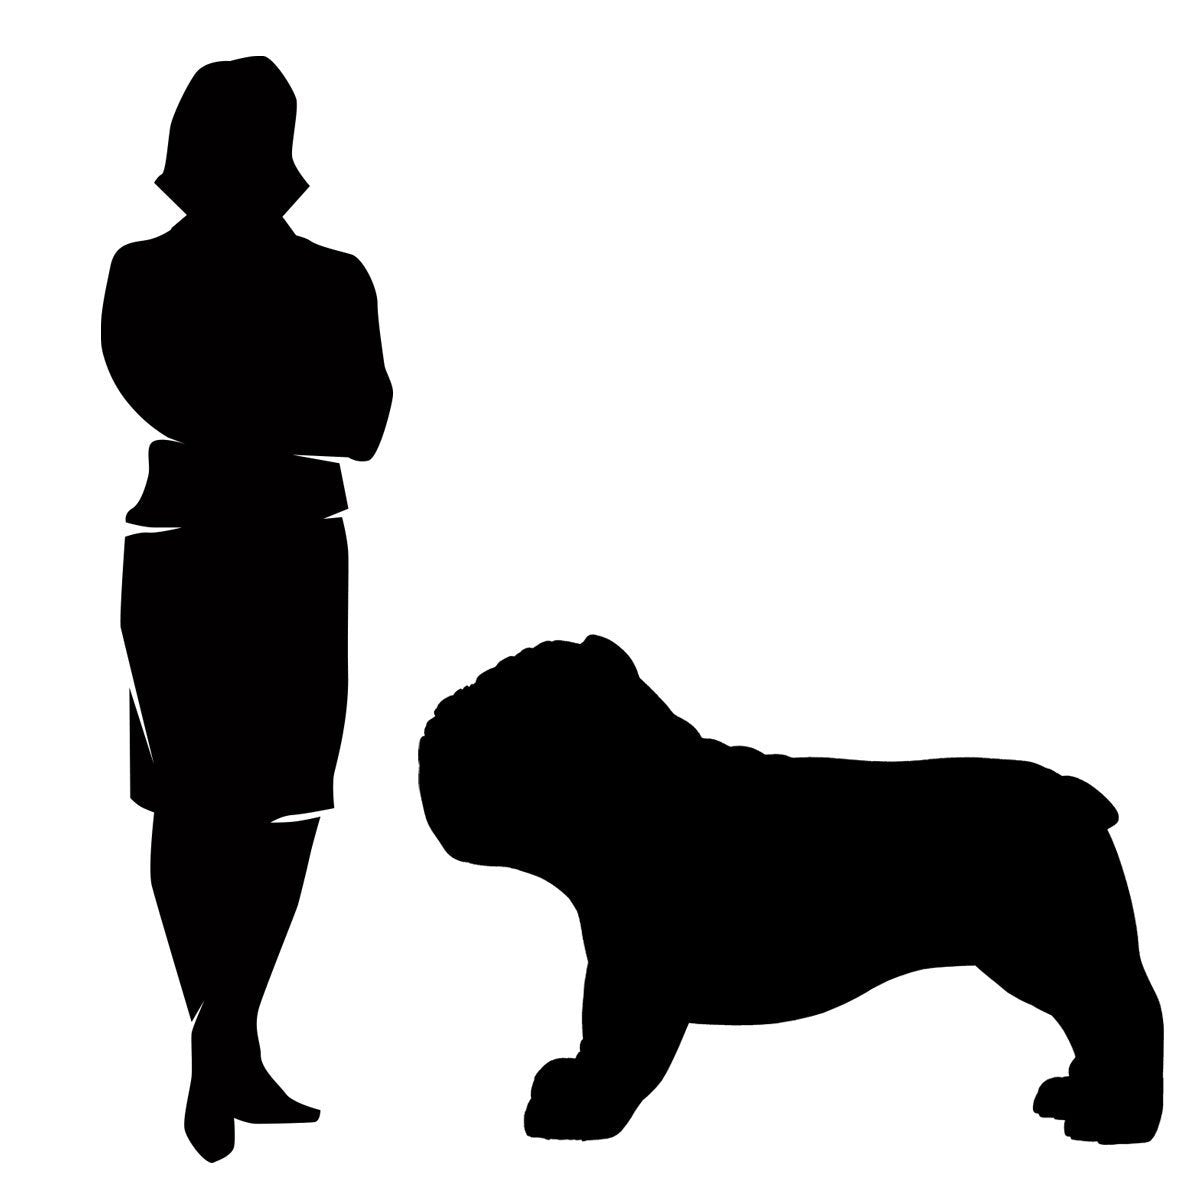 Size comparison of large bulldog as compared to an average sized US woman. Black silhouettes on a white background.